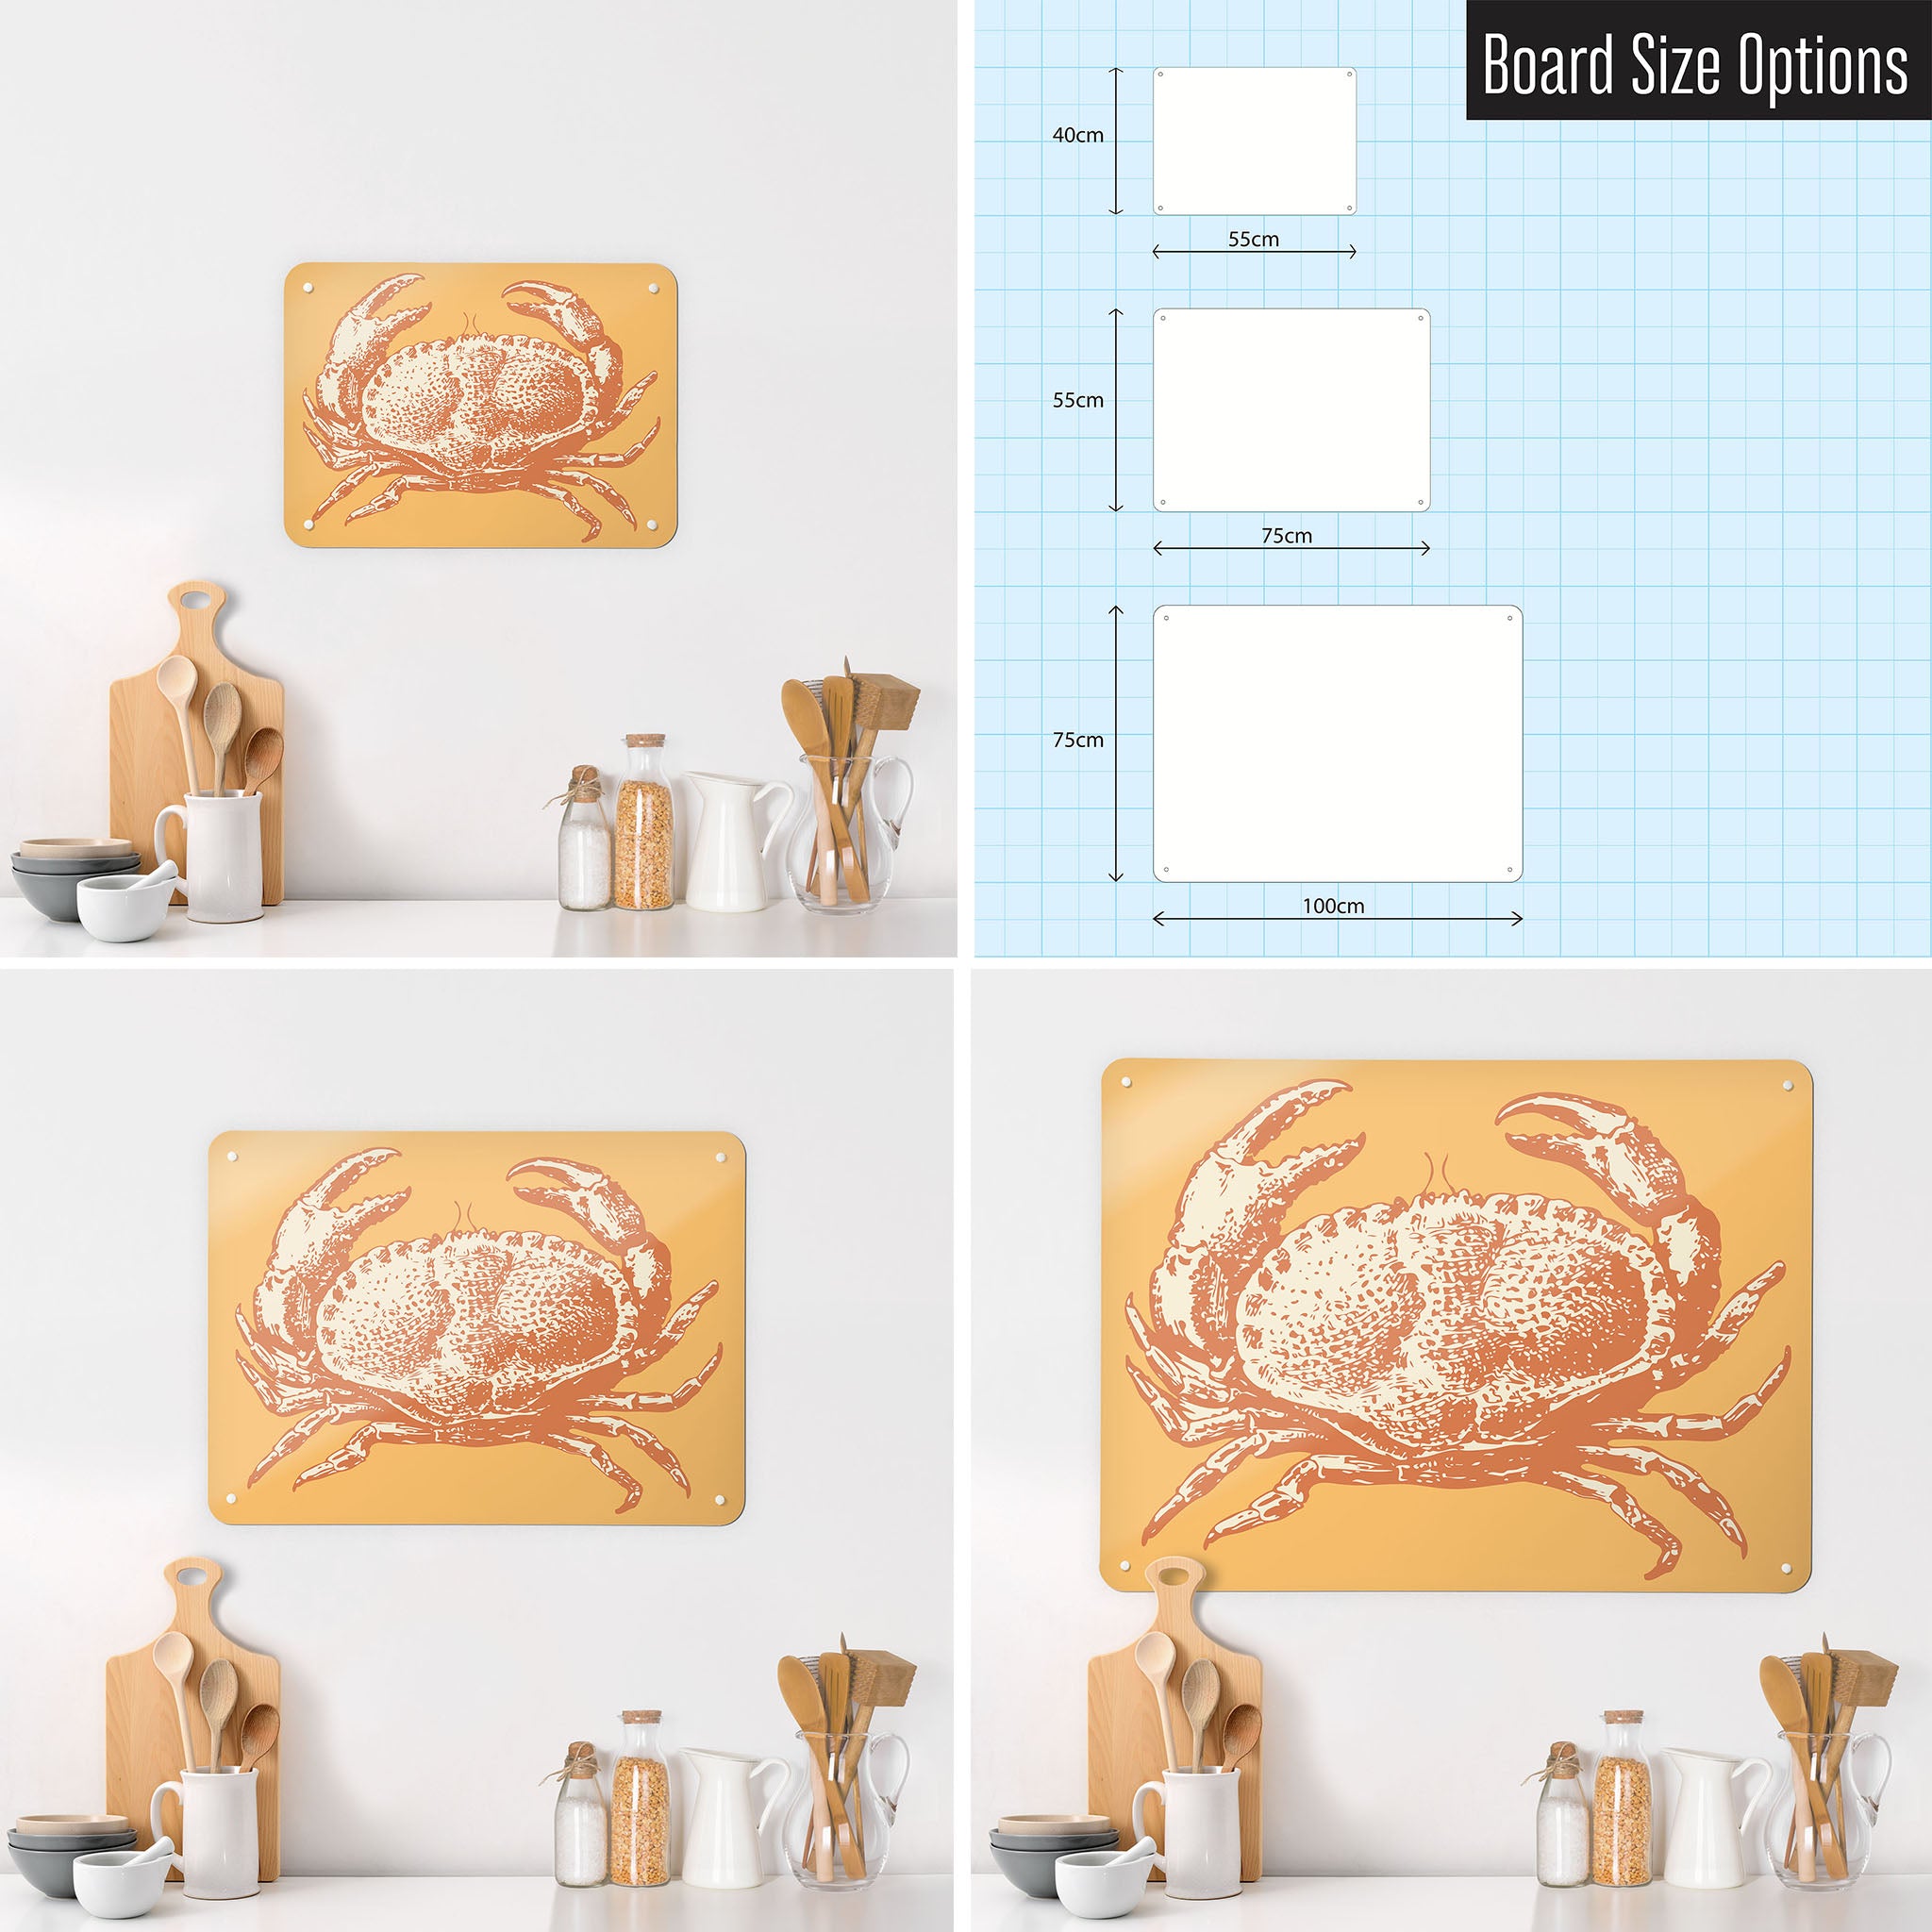 Three photographs of a kitchen interior and a diagram to show size comparisons of a crab illustration magnetic notice board